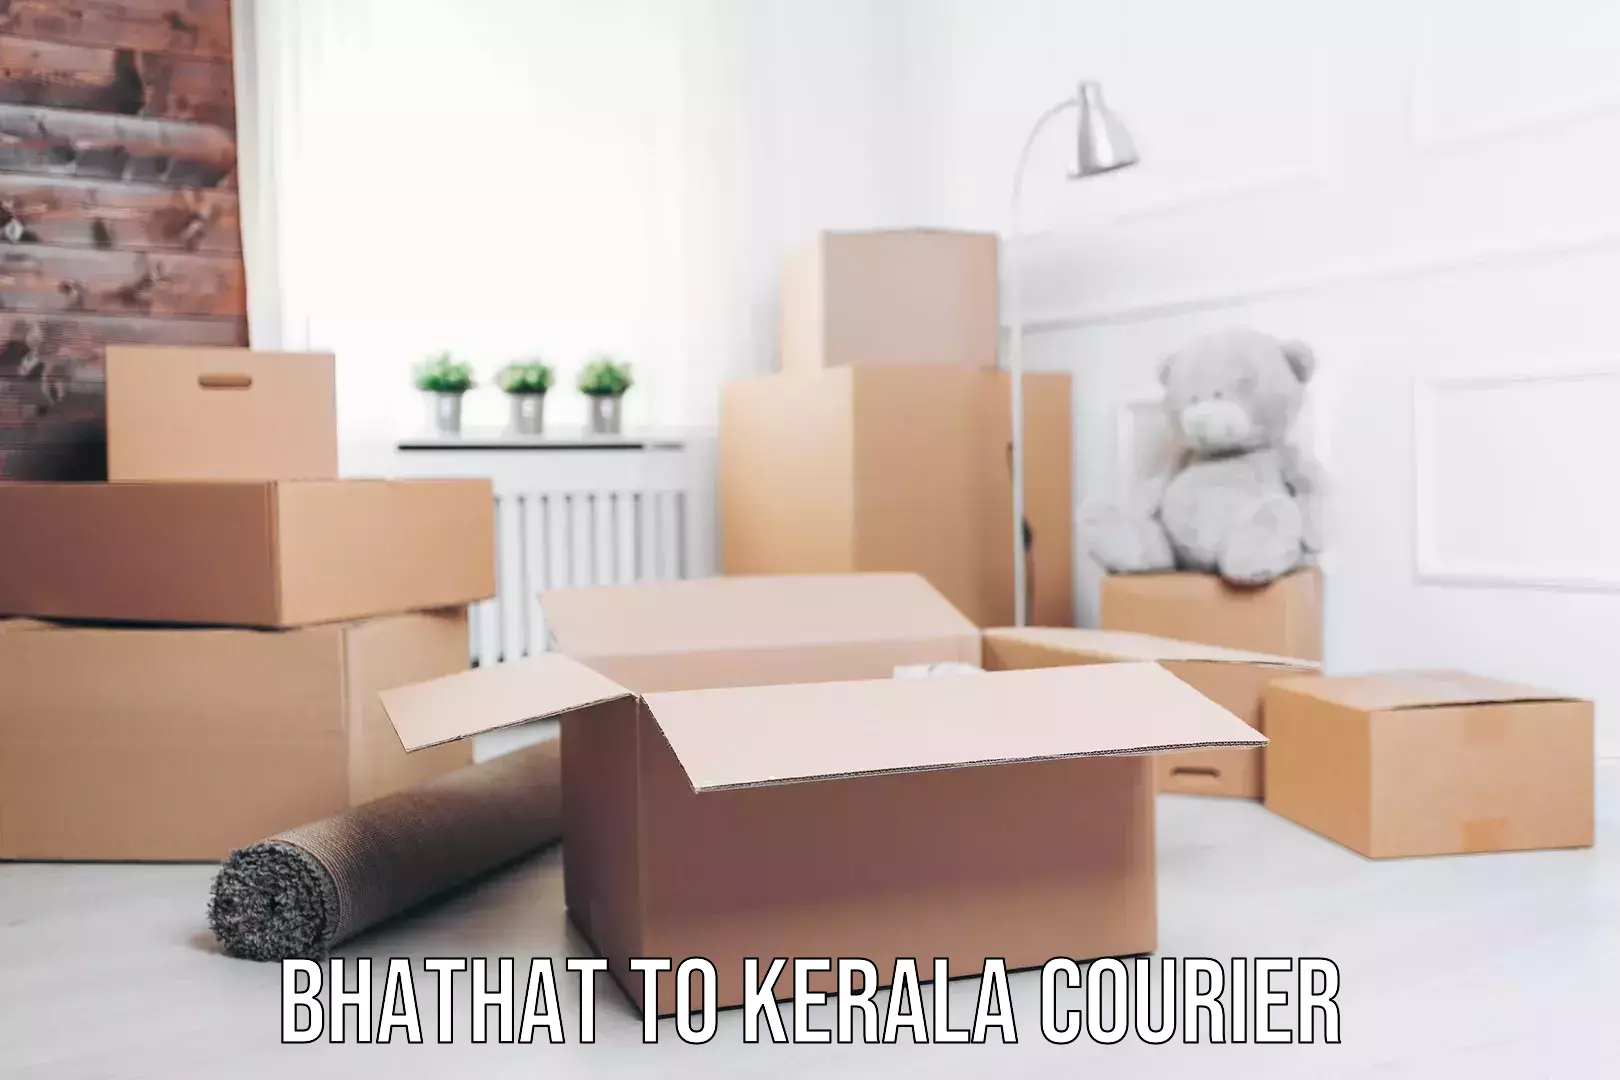 Customizable delivery plans Bhathat to Kerala